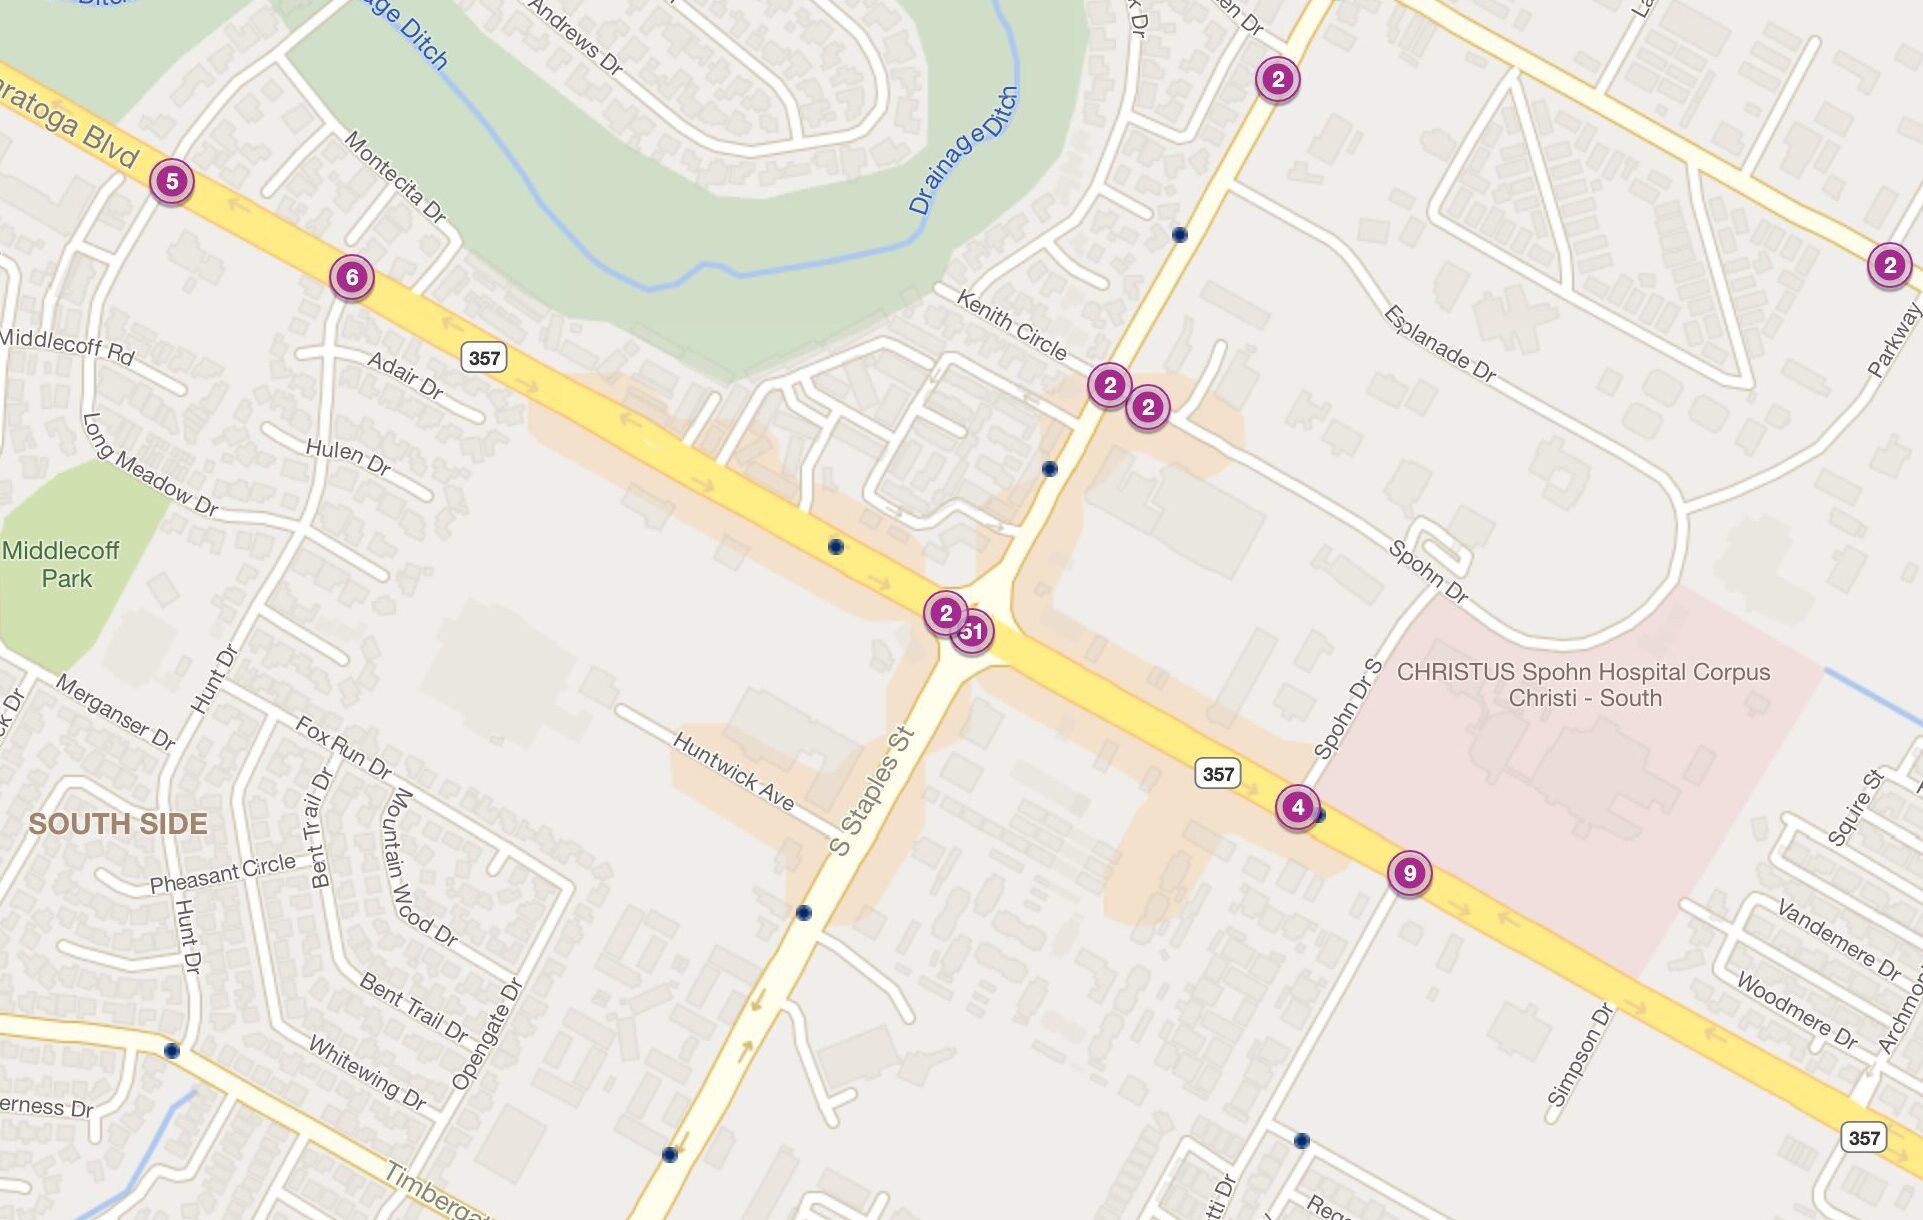 Cluster Map of 2023 Car Accidents at S. Staples St. & Saratoga Blvd. (TXDOT)